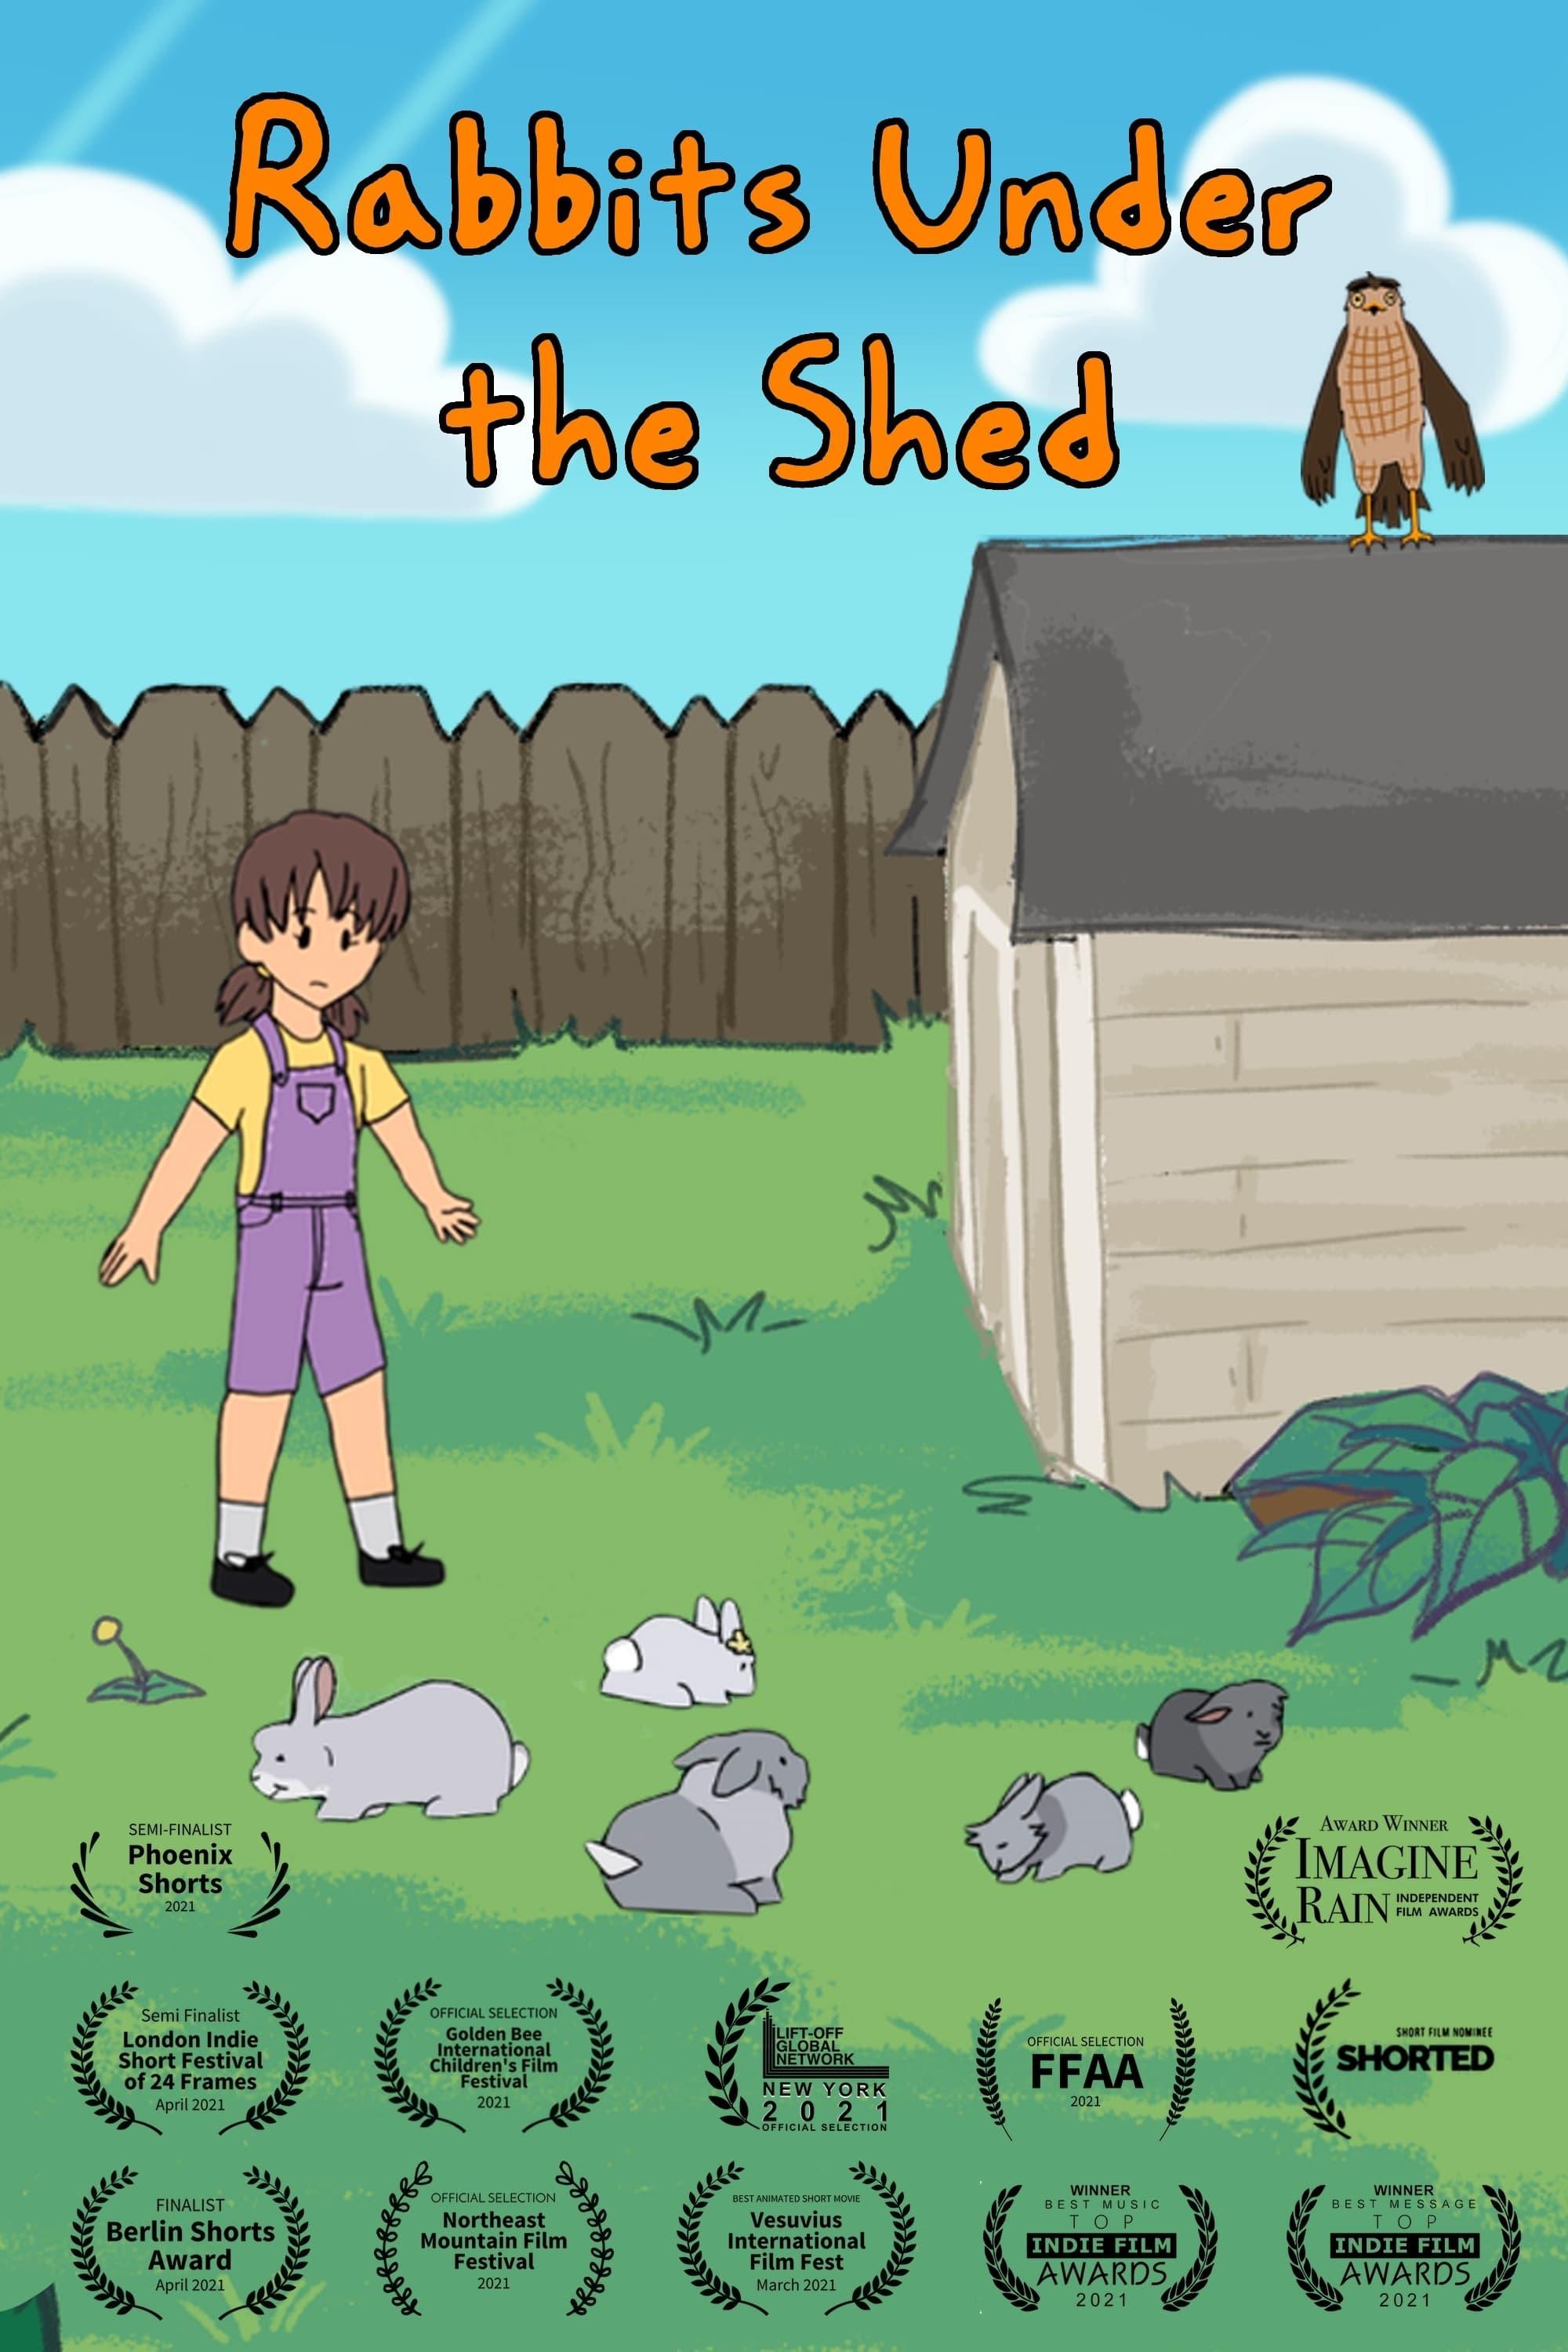 Rabbits Under the Shed poster